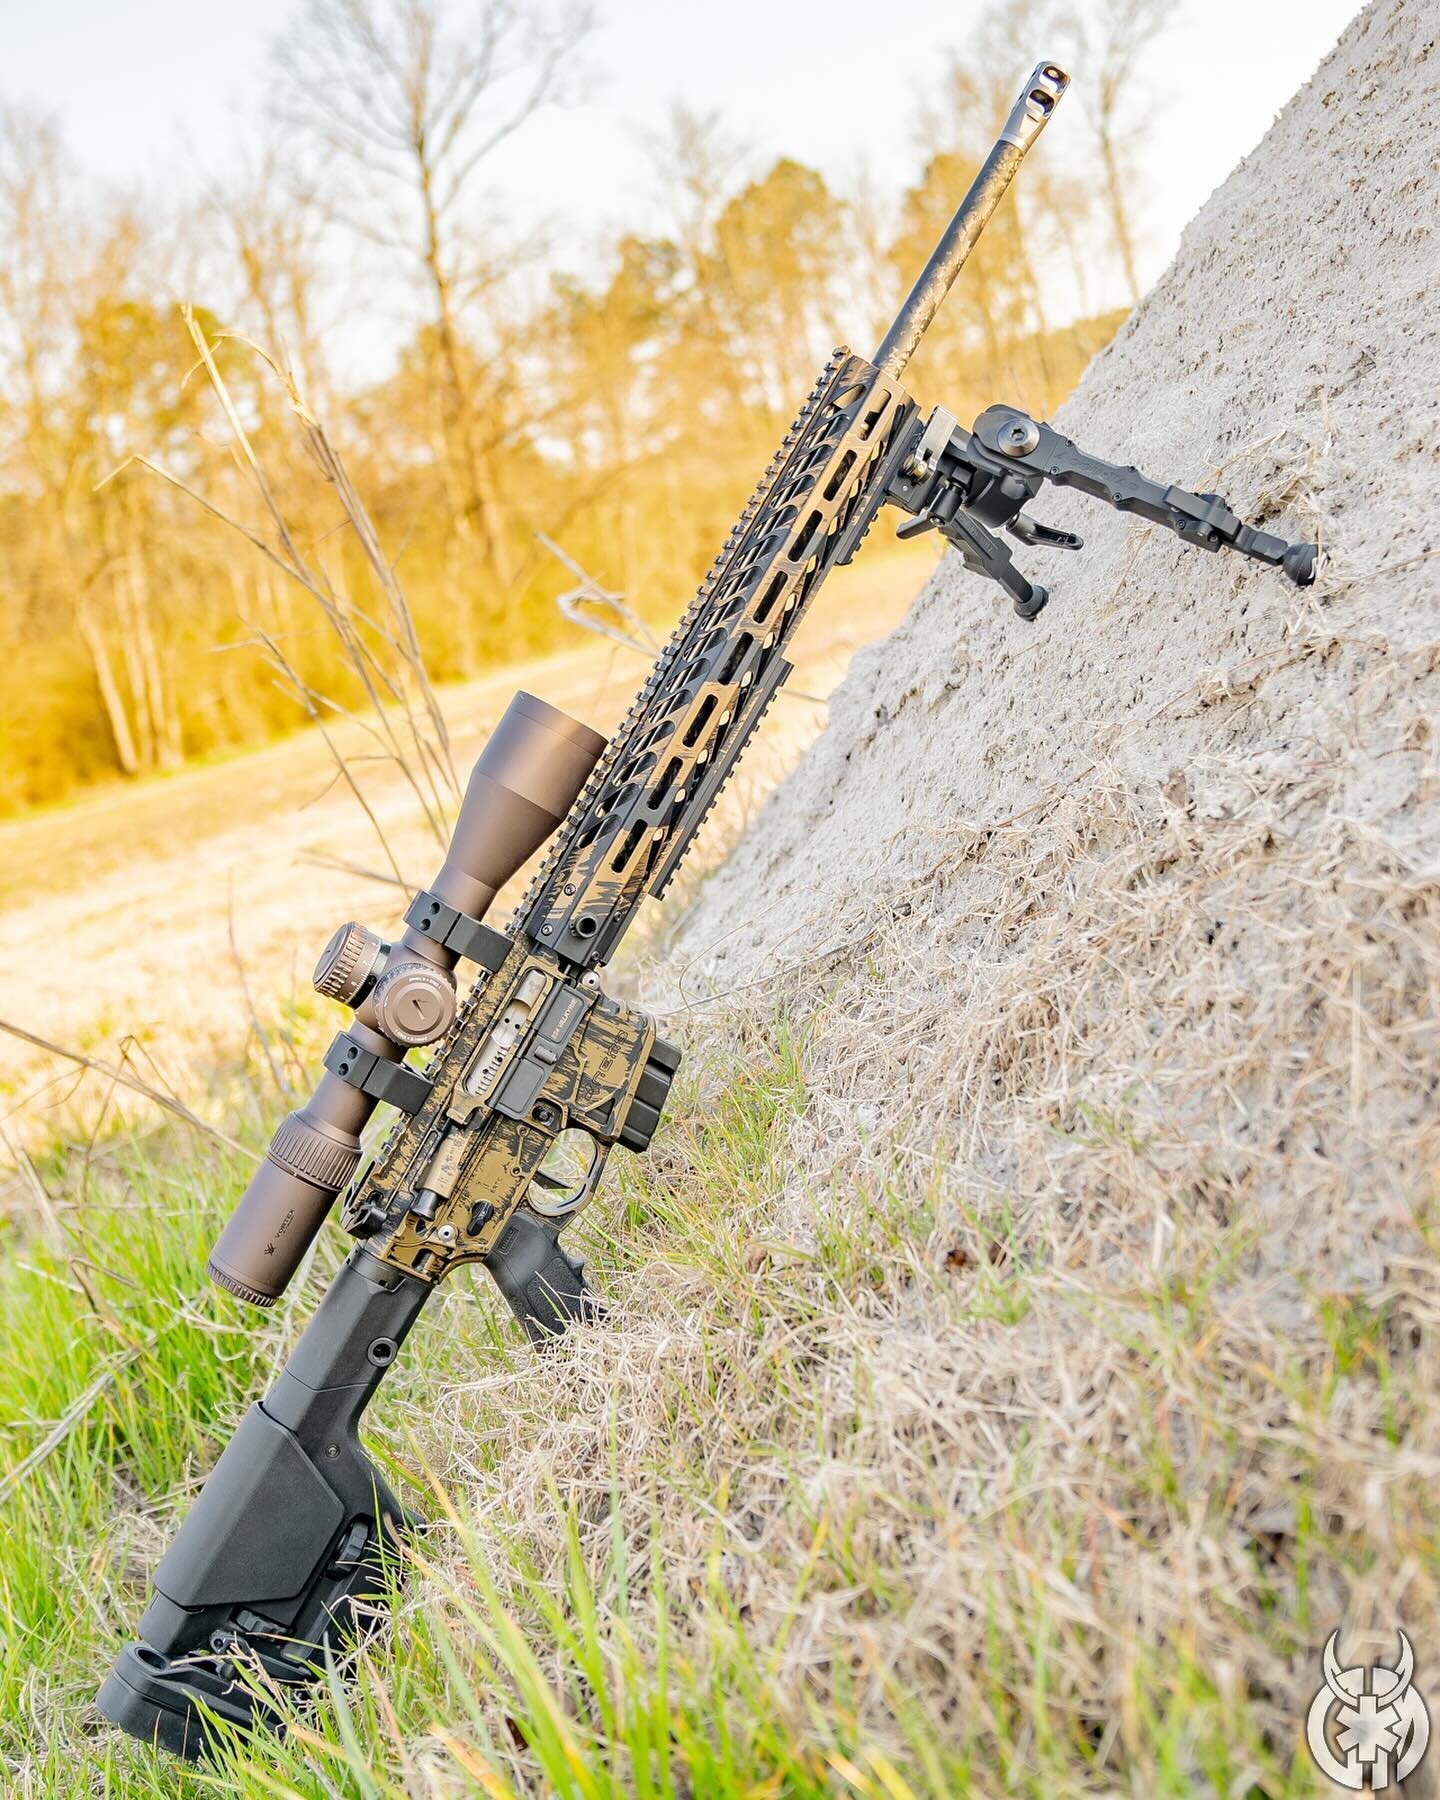 Let&rsquo;s get down to business, this @nemo_arms 224V rifle is the bees knees! 

- Nemo 224V Rifle
- @accutac Bipod
- @vortexoptics Scope